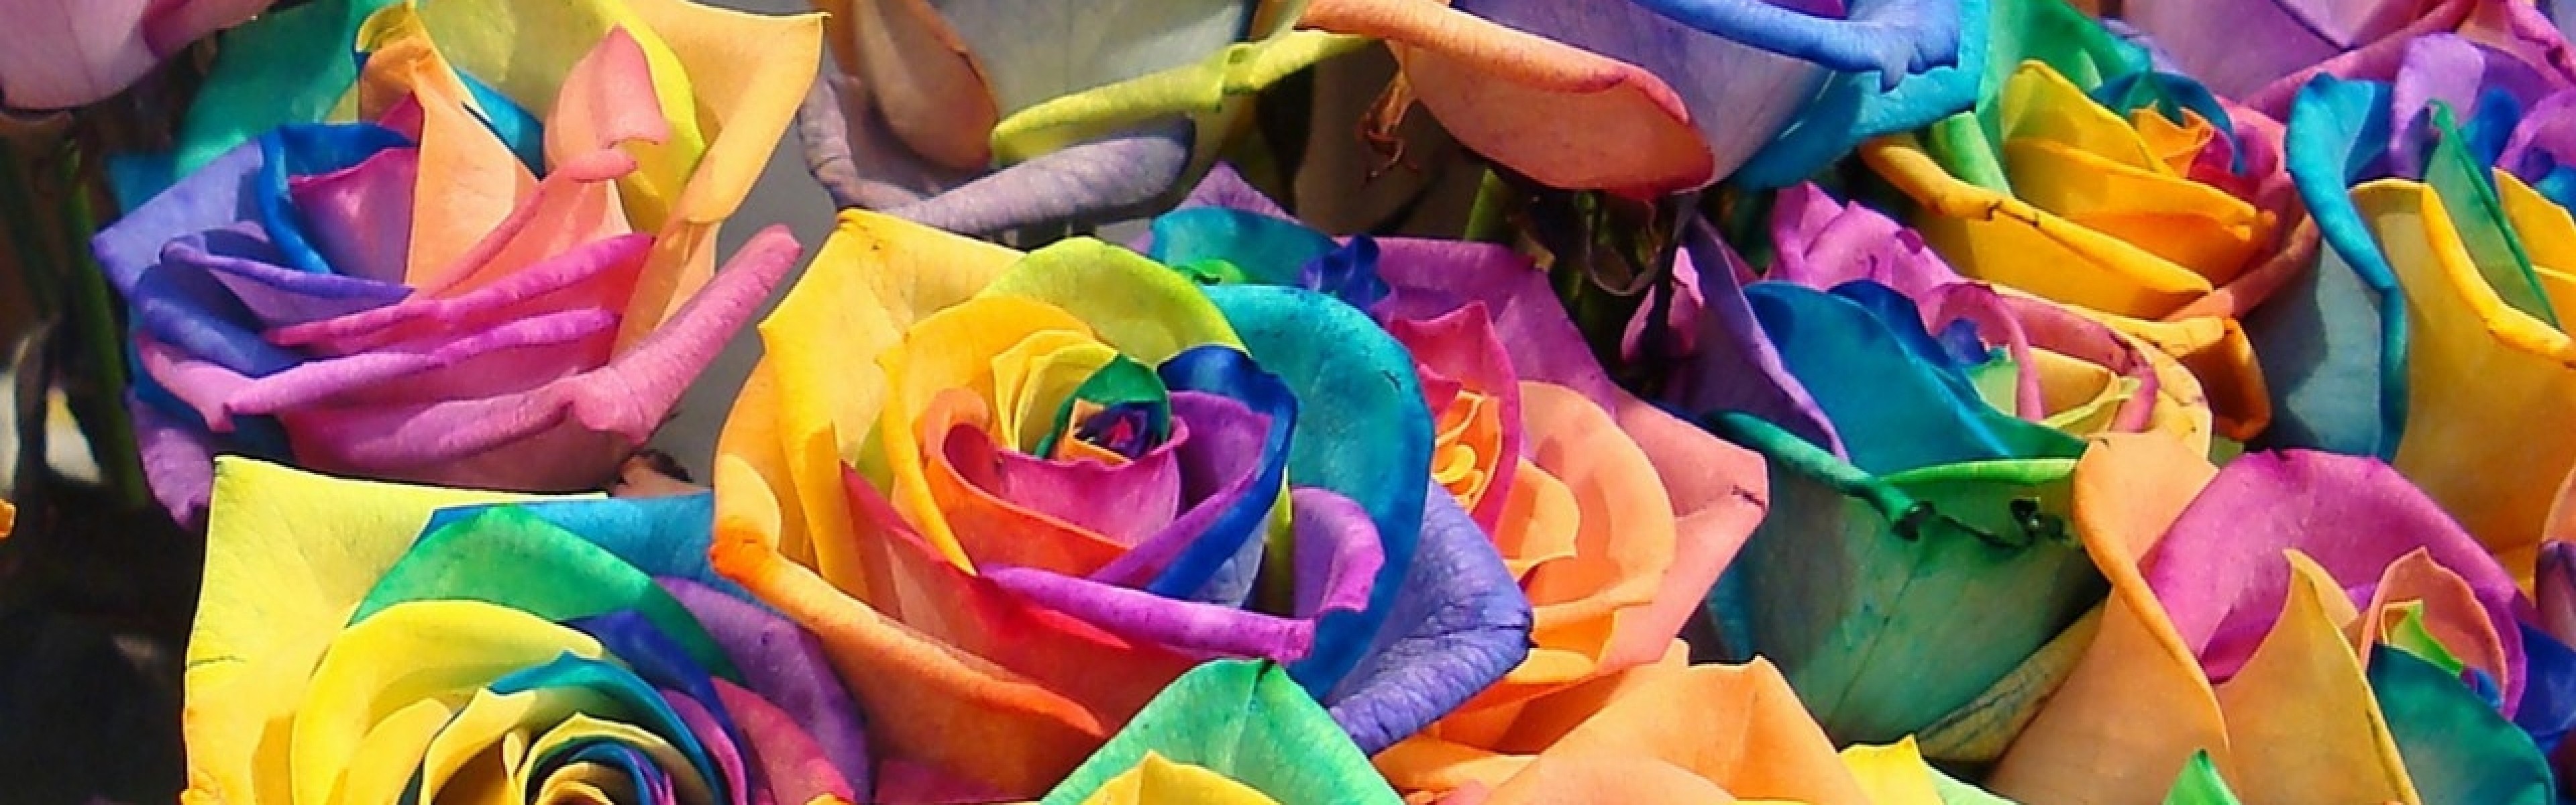 3840x1200  Wallpaper roses, flowers, colorful, buds, bright